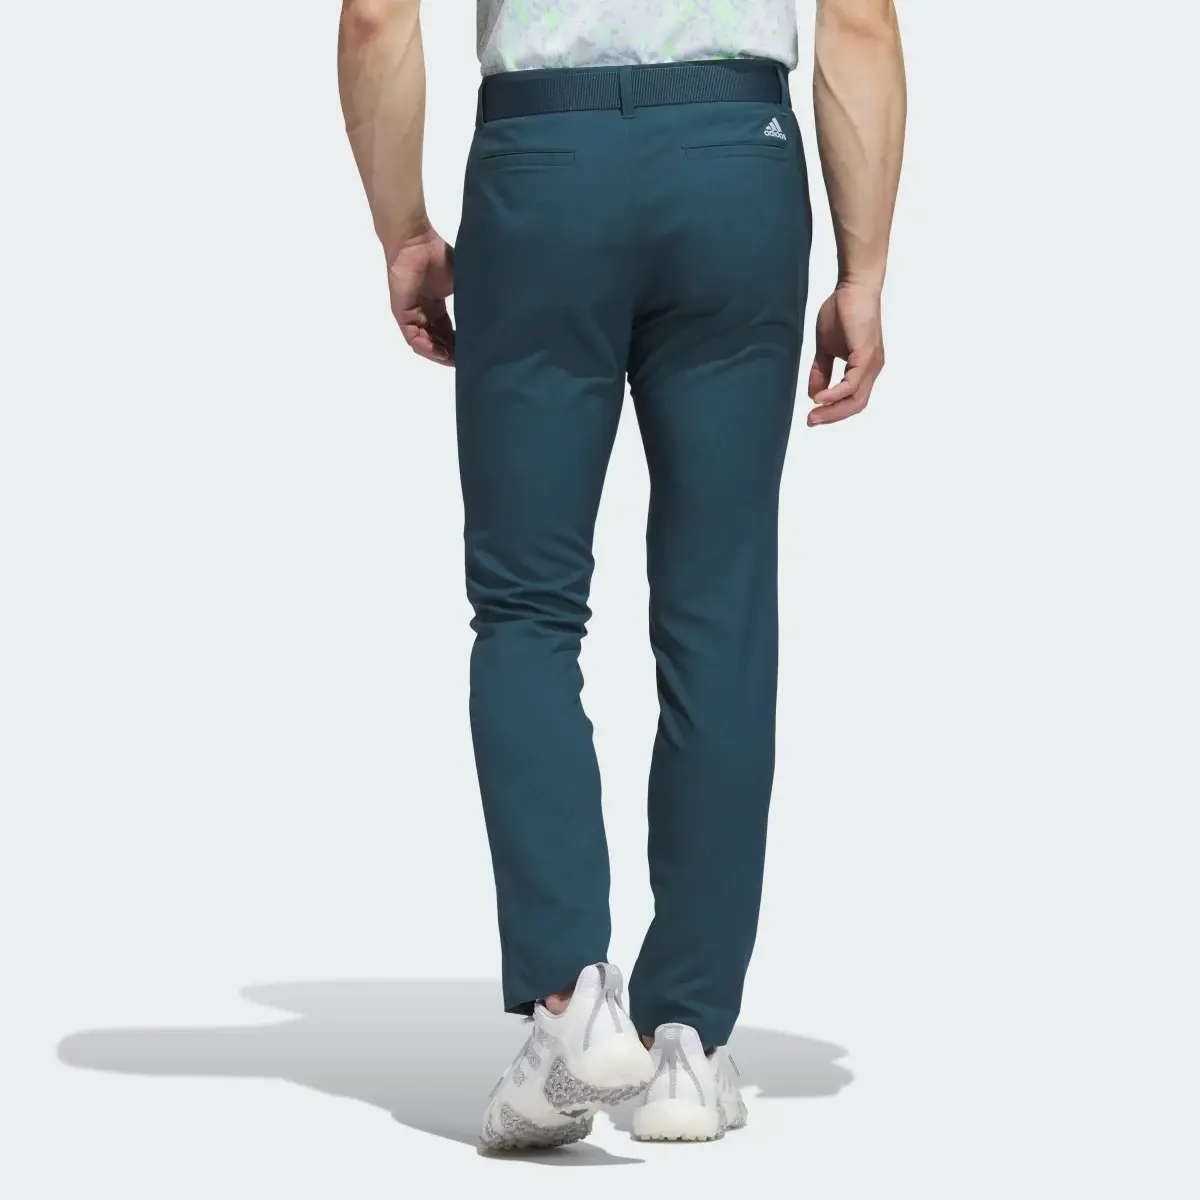 Adidas Ultimate365 Tapered Pants. 2